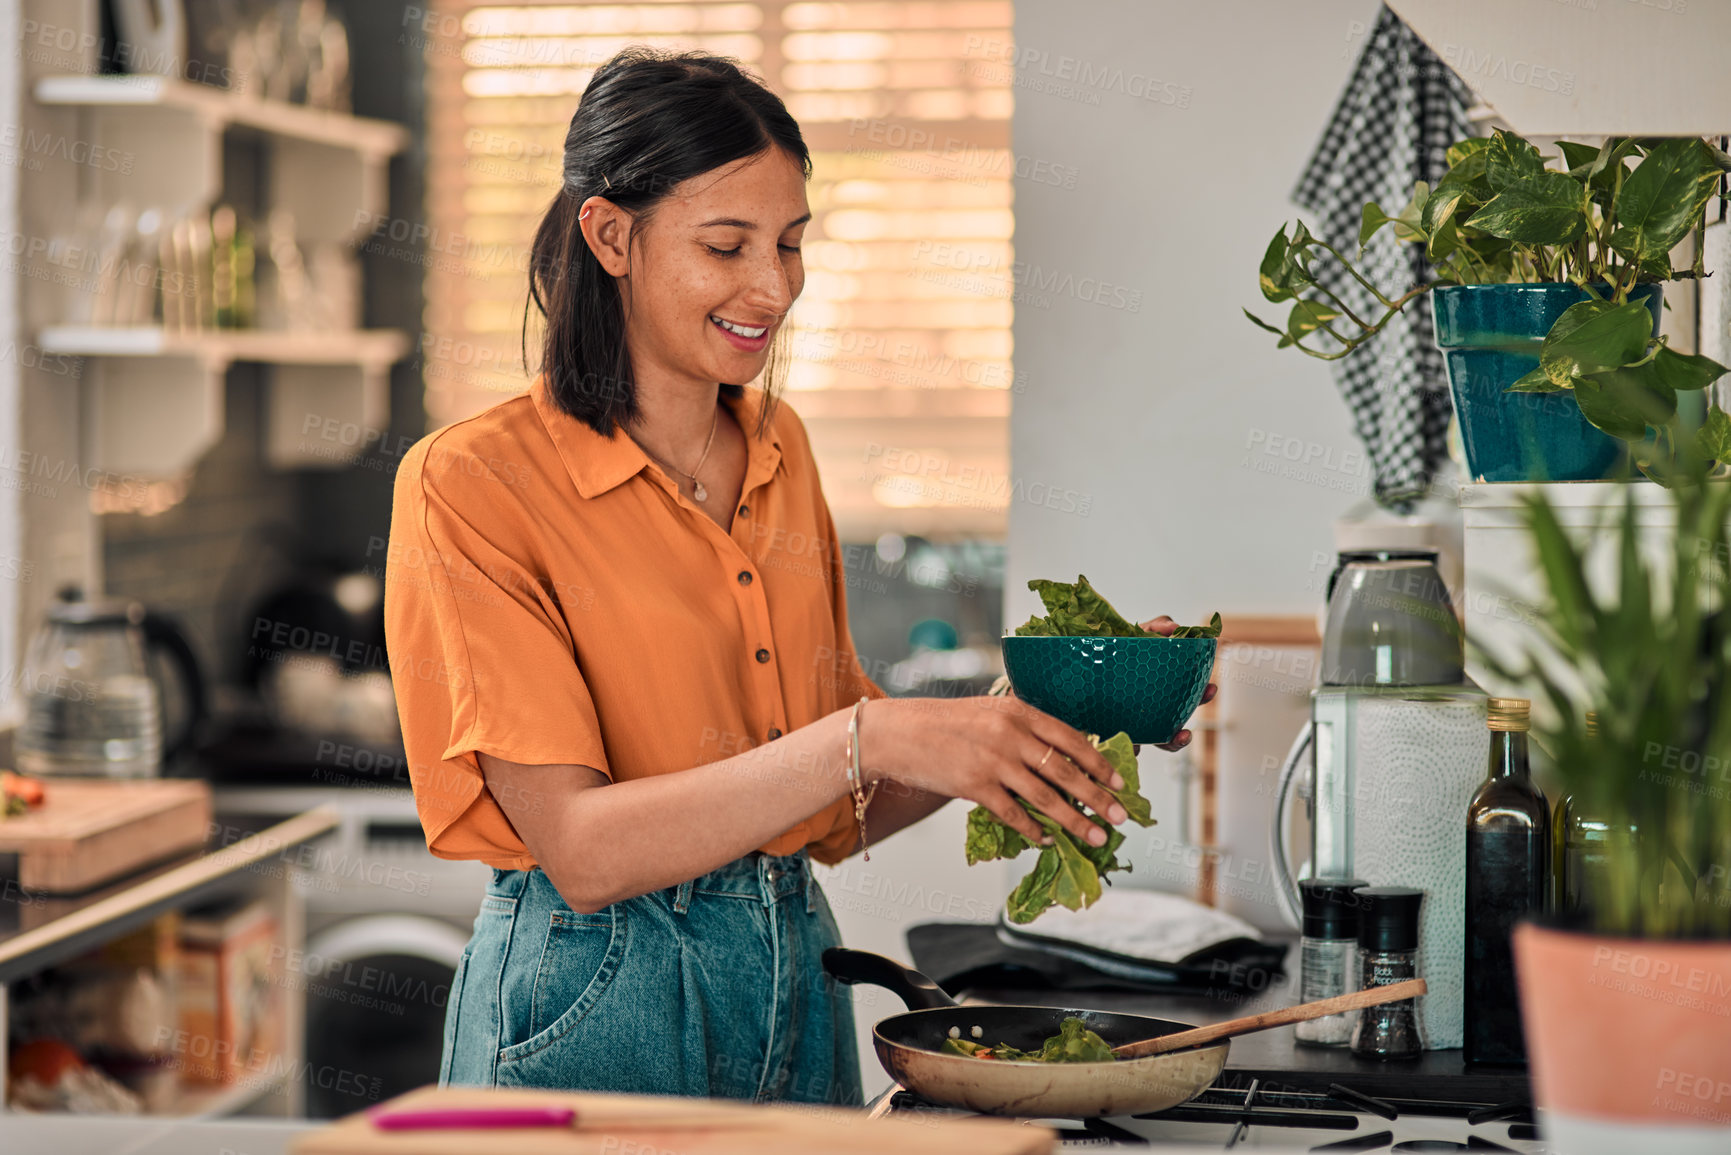 Buy stock photo Shot of a happy young woman preparing a healthy meal at home